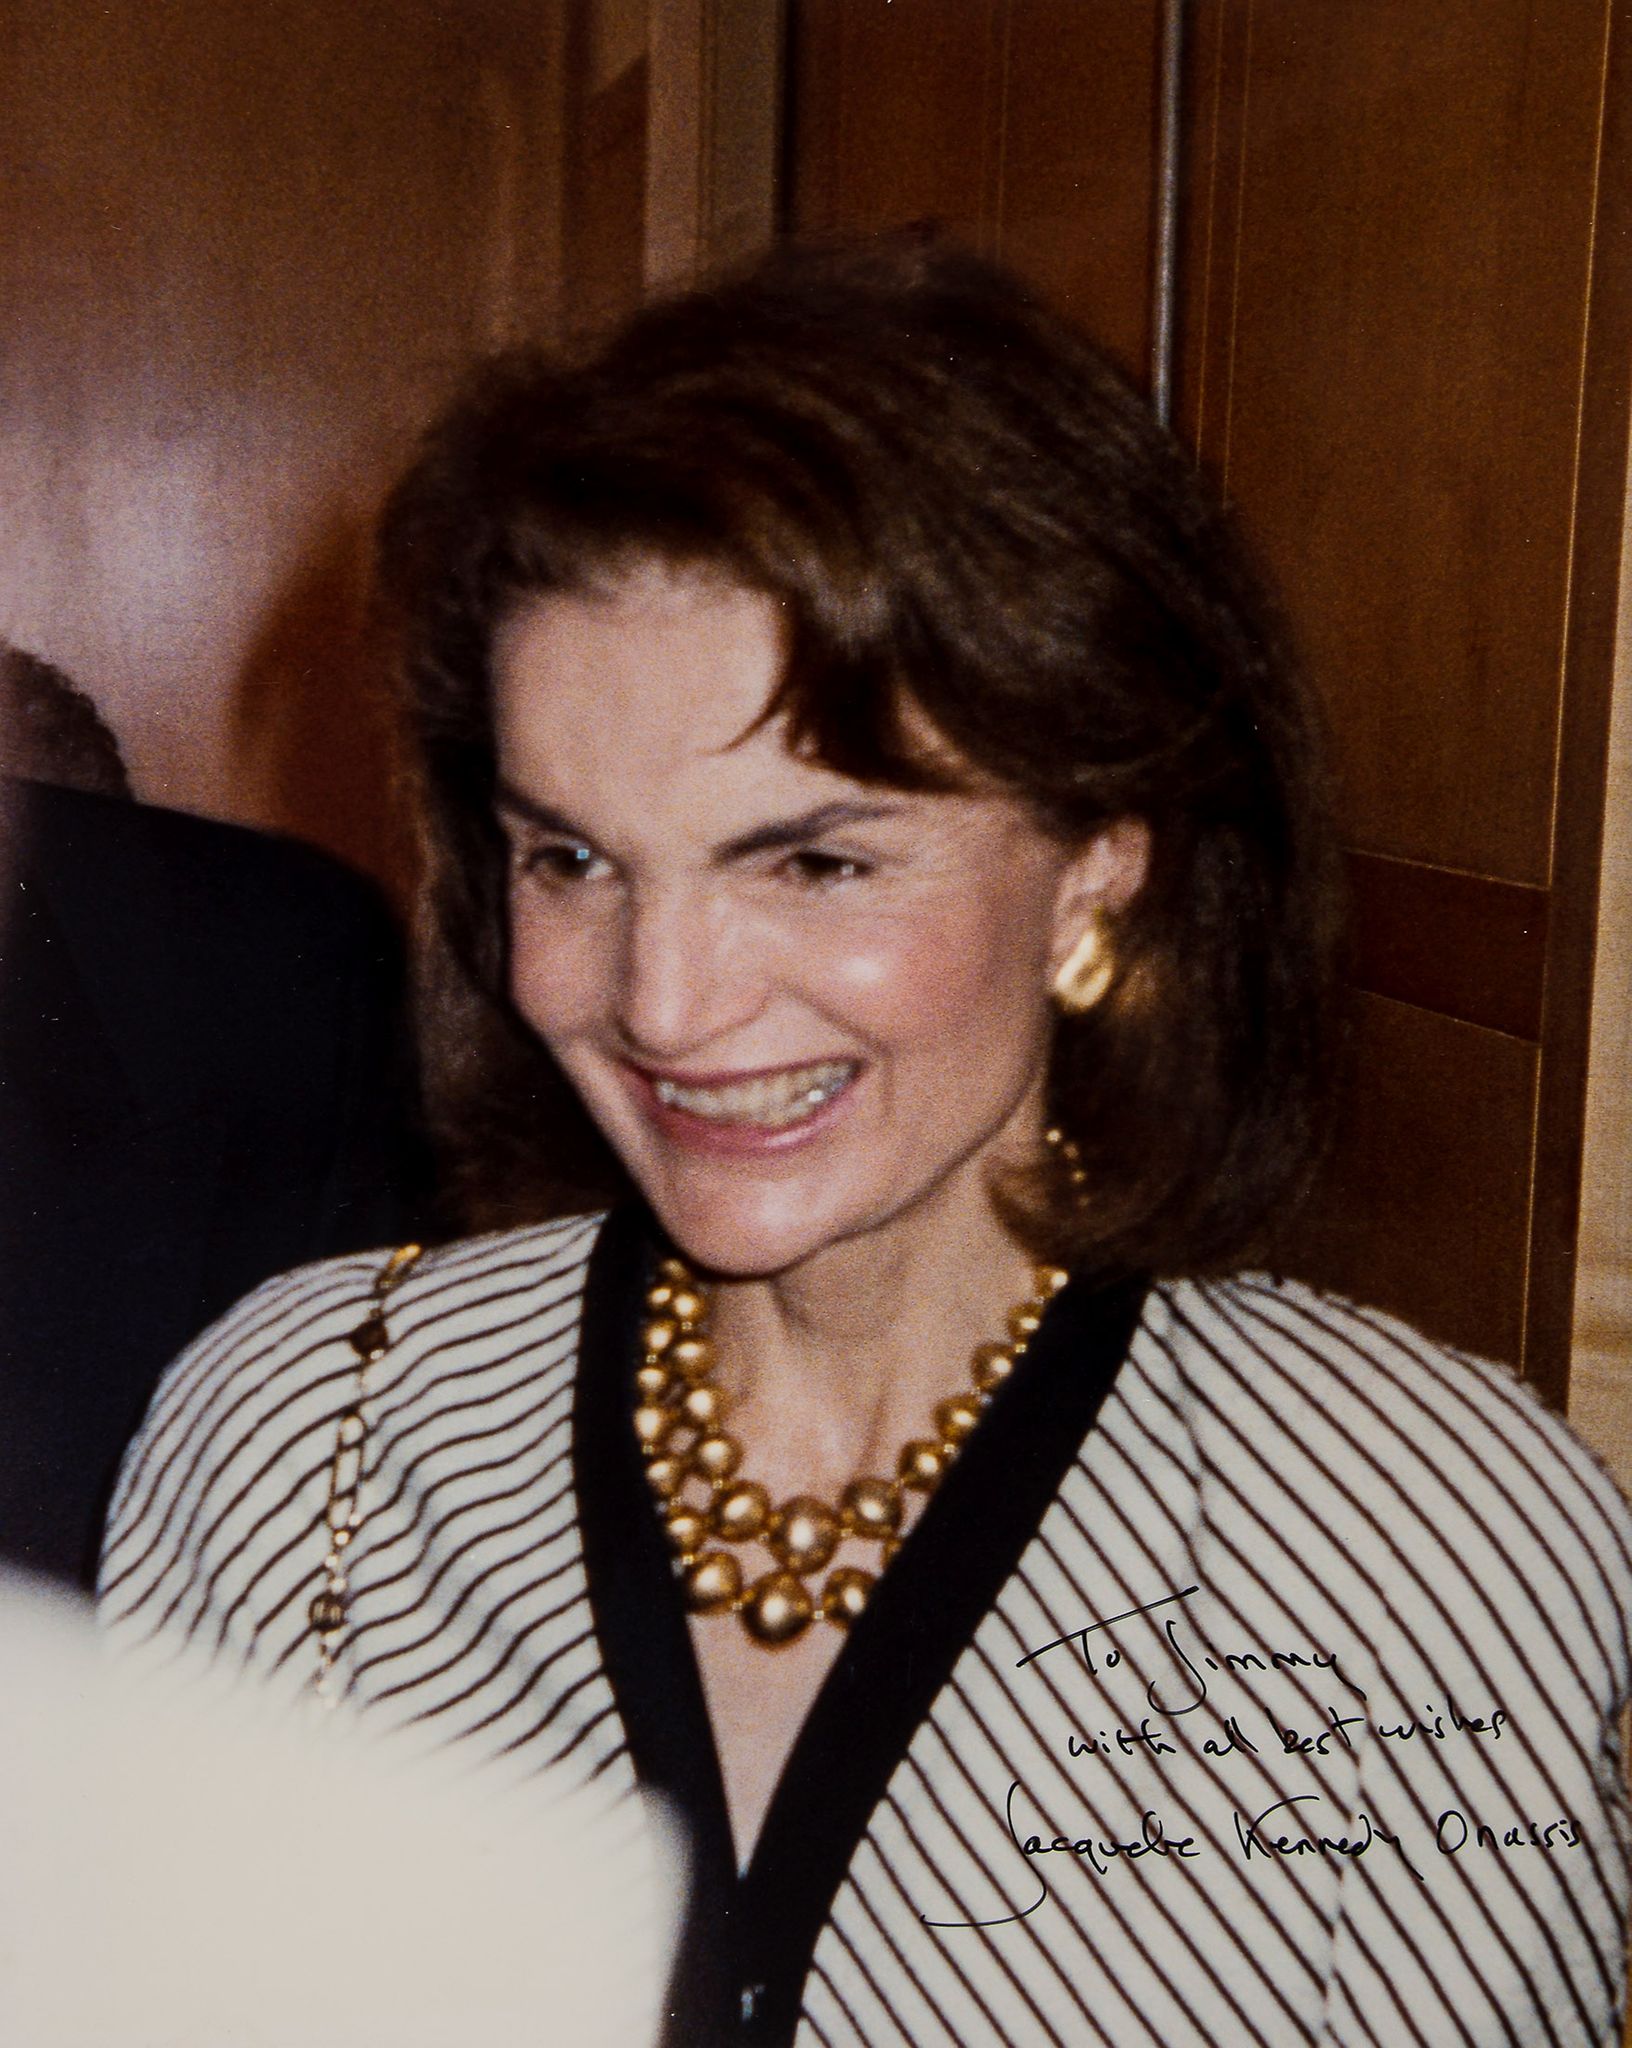 ONASSIS, JACQUELINE KENNEDY - Colour 10 x 8", head and shoulders candid photograph of a smiling...